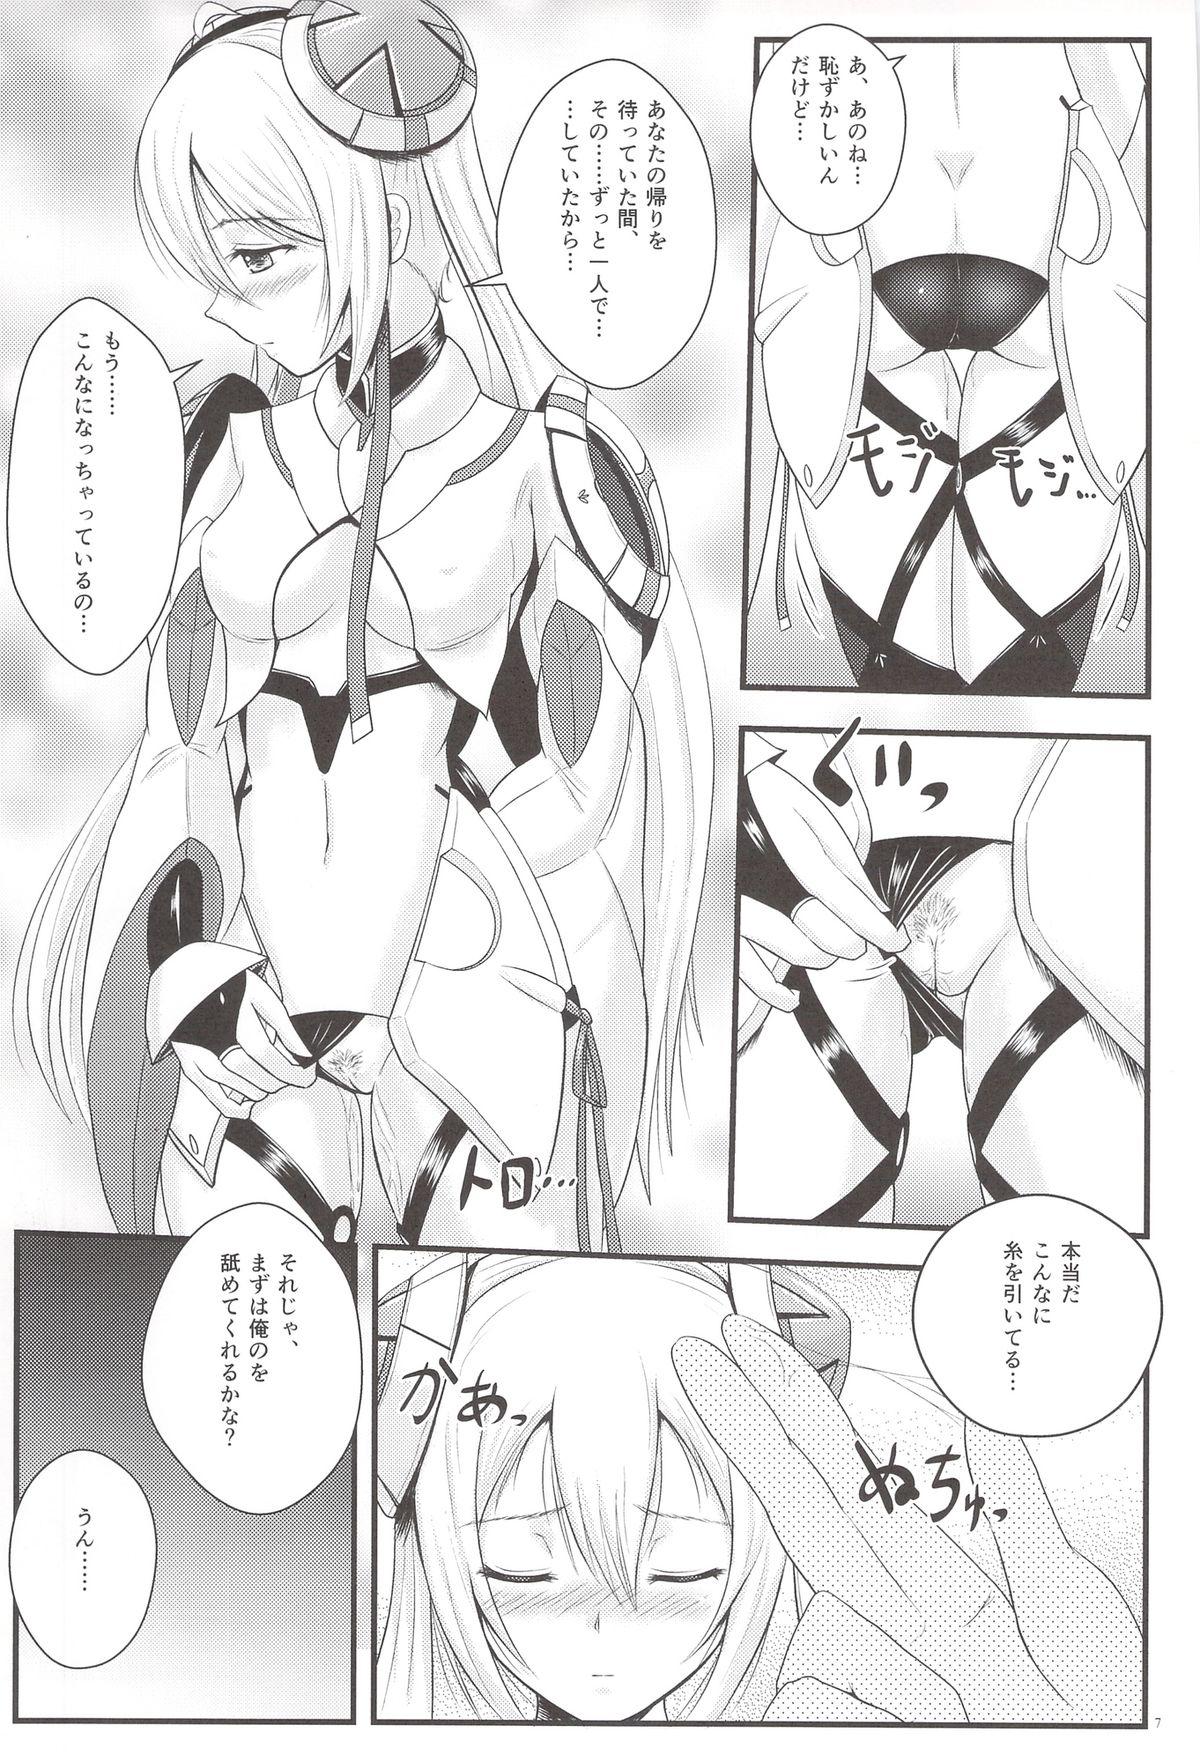 Orgasm When I think of you - Phantasy star online 2 Street Fuck - Page 6